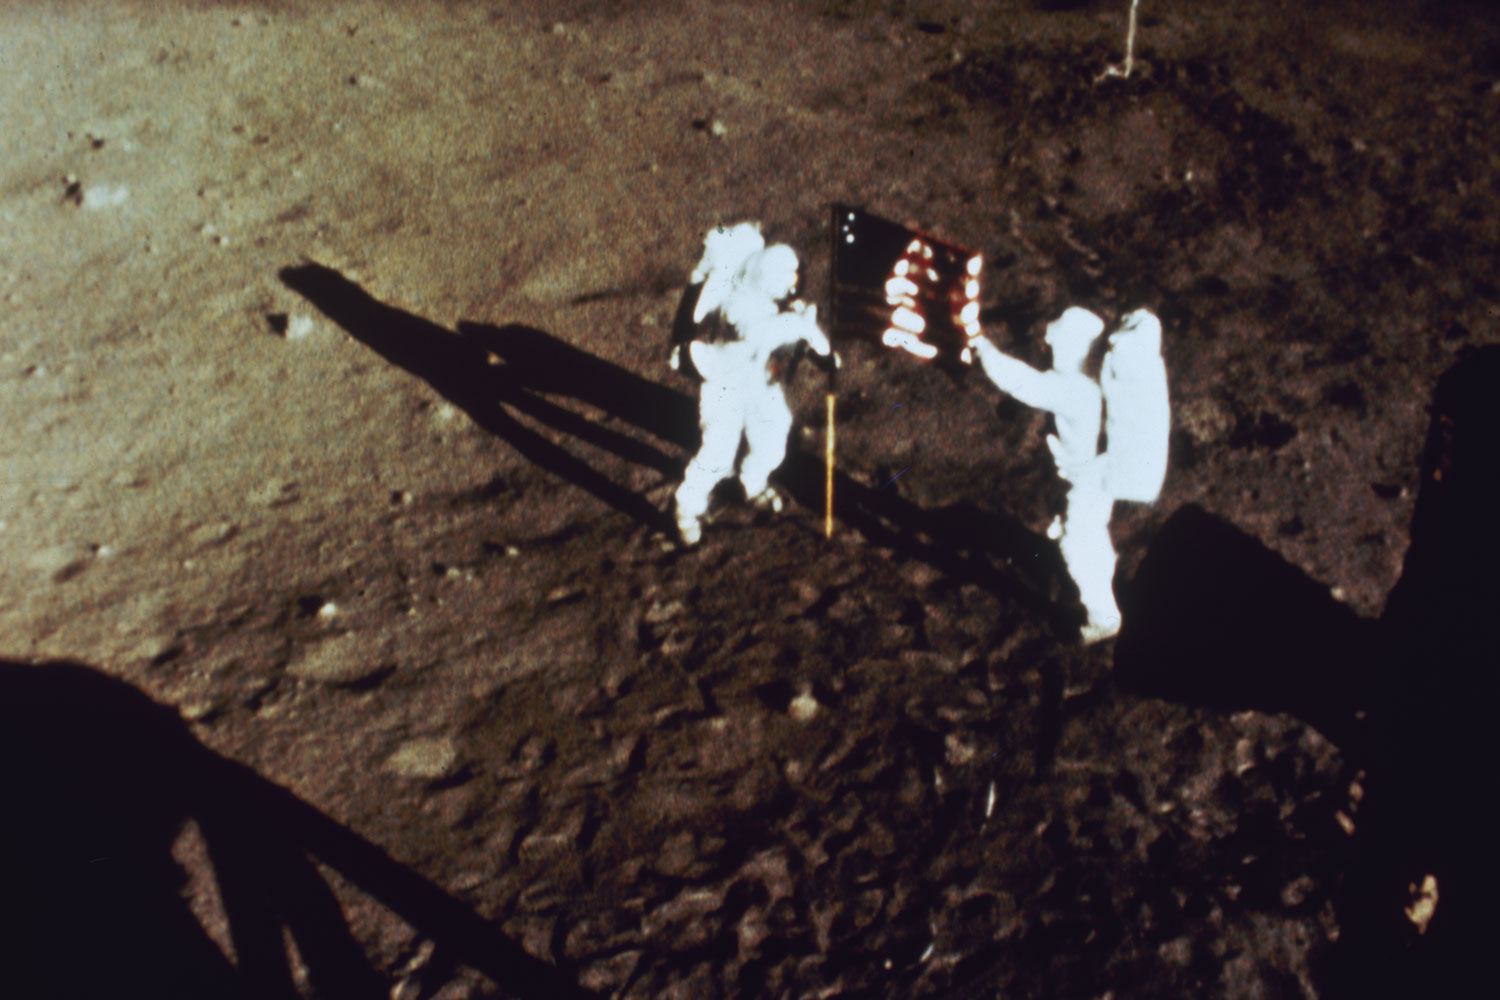 Apollo 11 astronauts Neil Armstrong and Buzz Aldrin plant the American flag on the moon, July 1969.